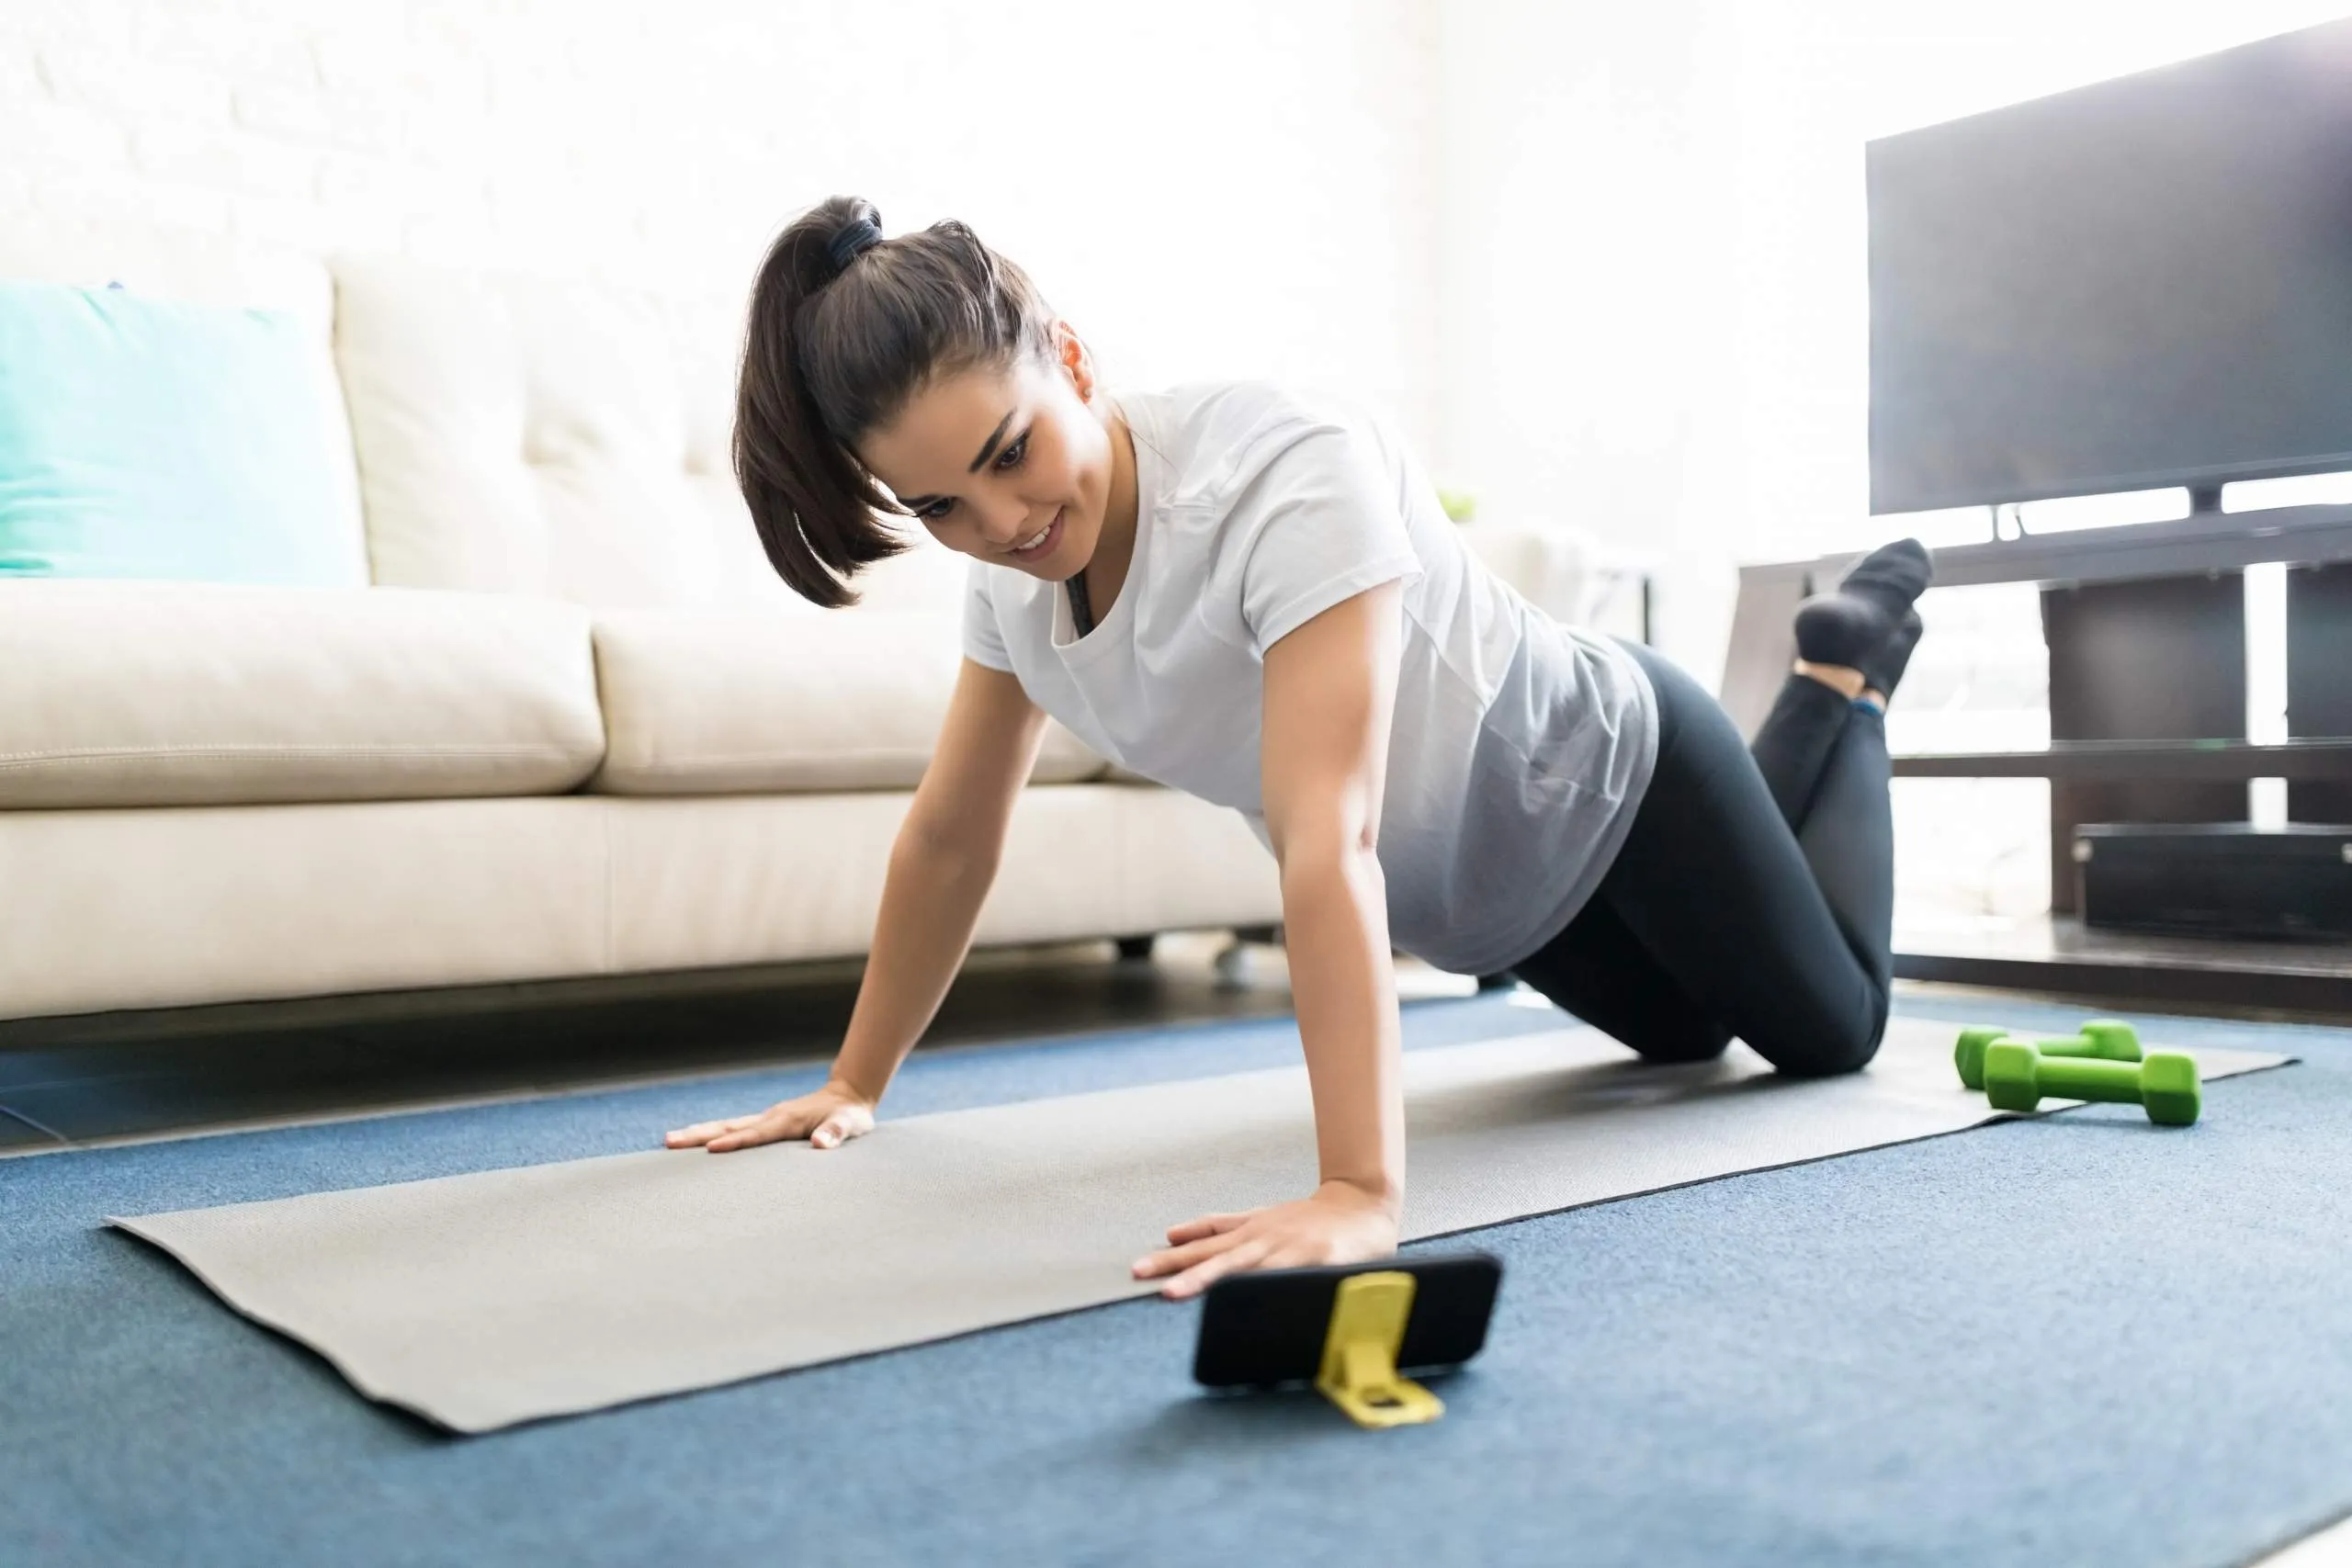 The Best Free Fitness Options to Work Out At Home